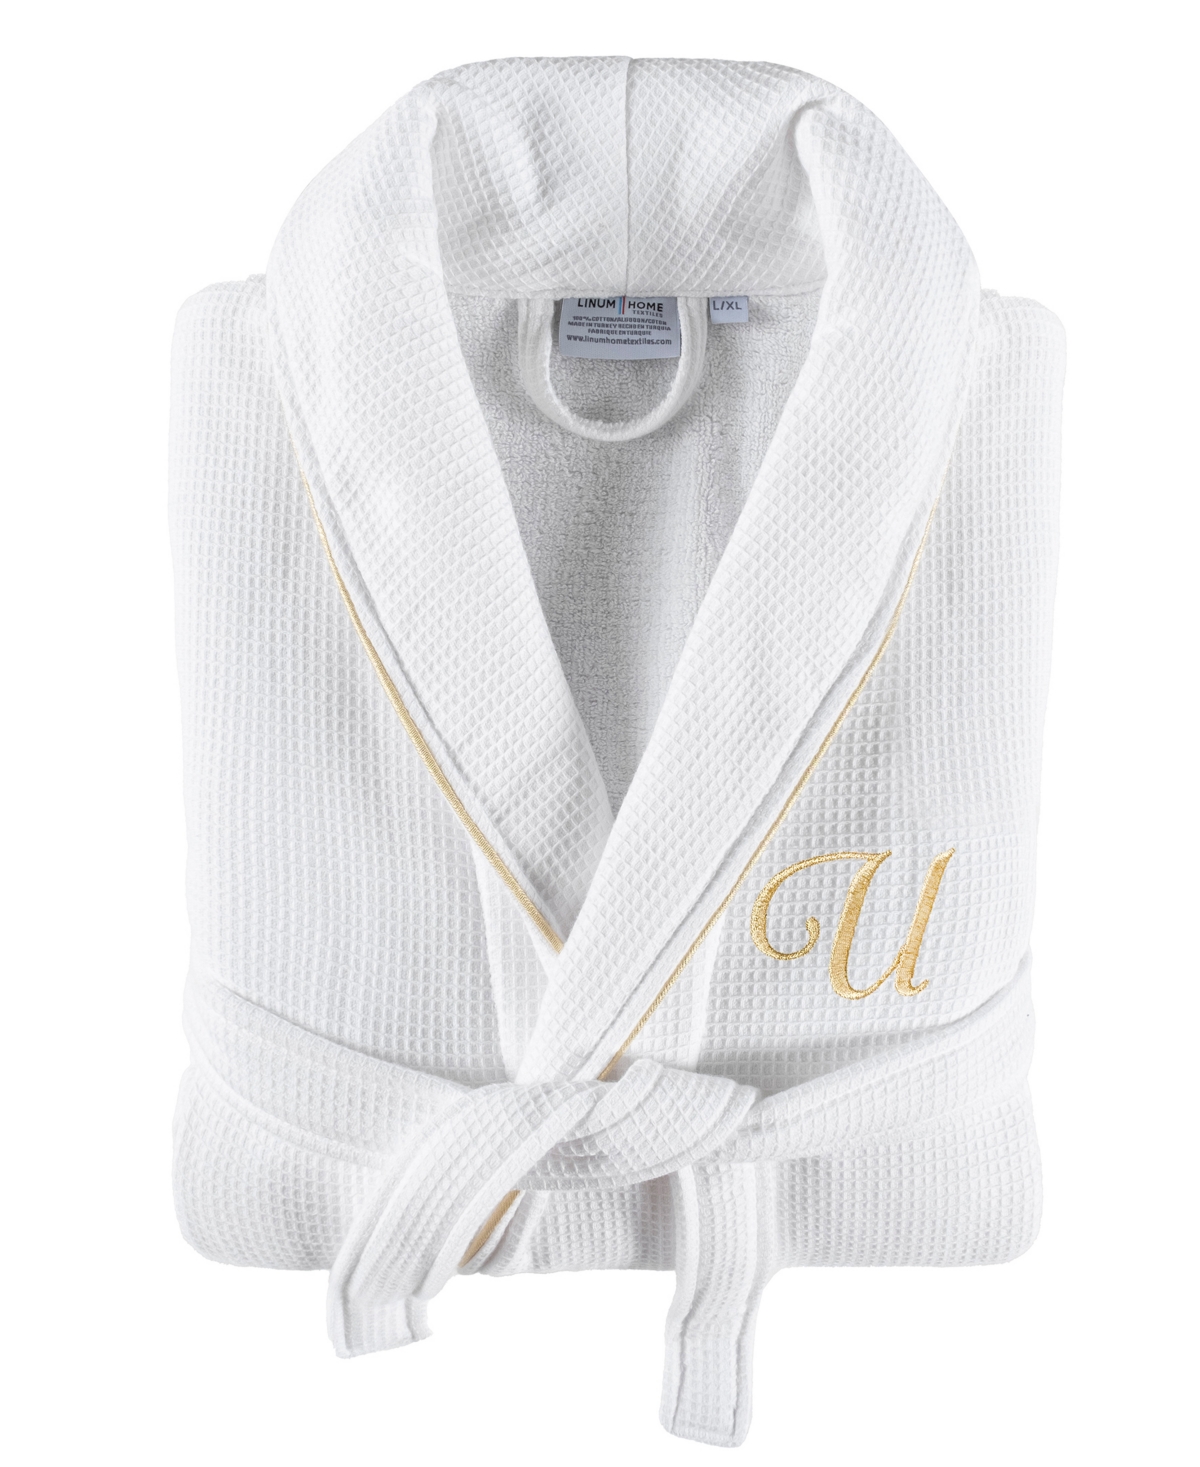 Shop Linum Home Textiles 100% Turkish Cotton Unisex Personalized Waffle Weave Terry Bathrobe With Satin Piped Trim In White U